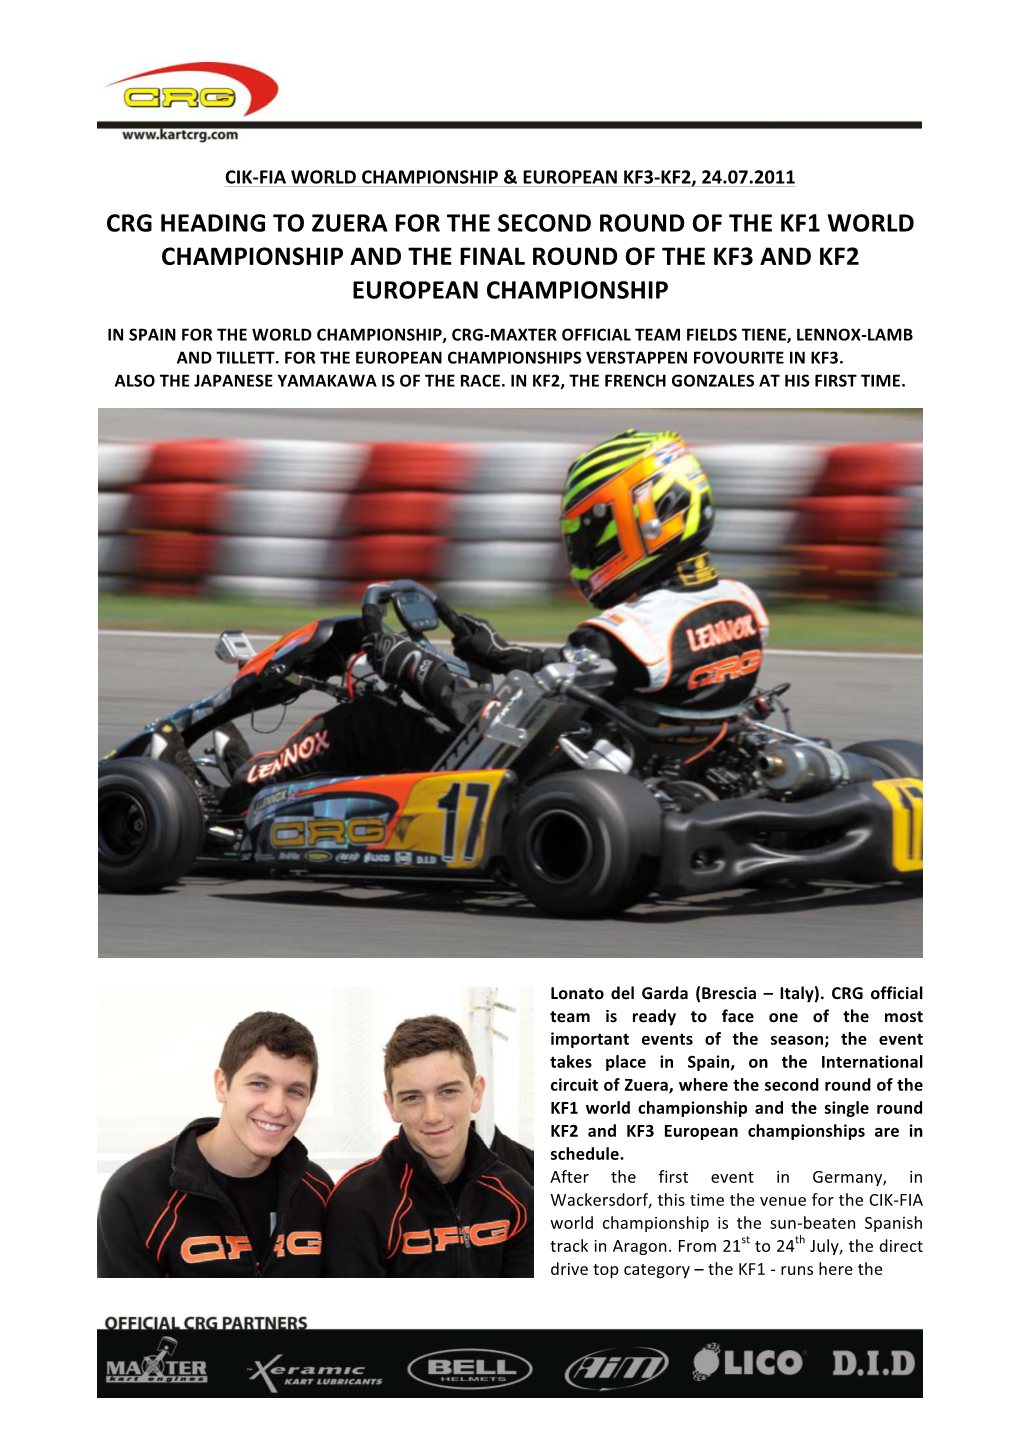 Crg Heading to Zuera for the Second Round of the Kf1 World Championship and the Final Round of the Kf3 and Kf2 European Championship